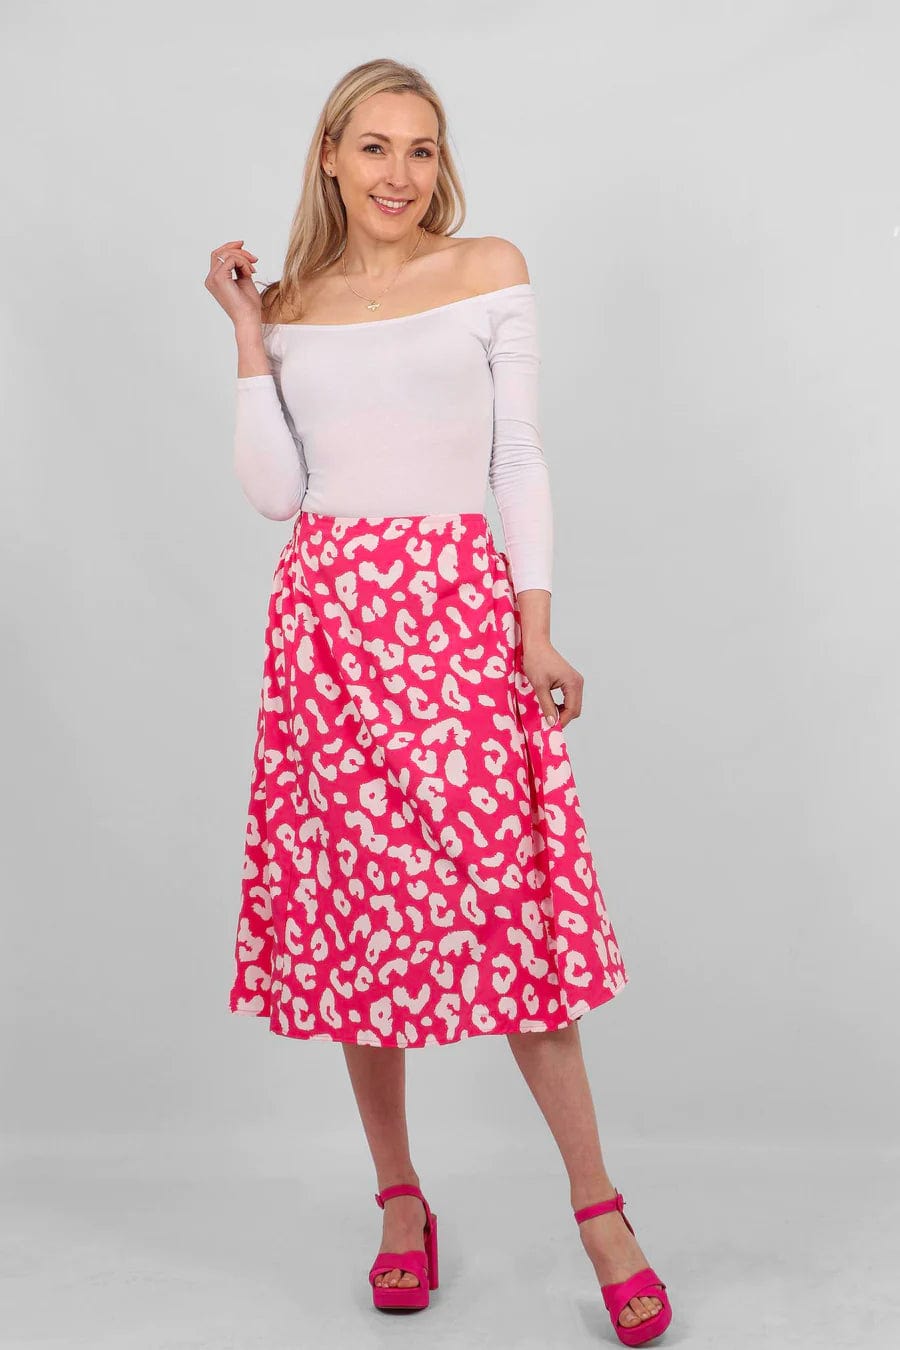 lusciousscarves skirts Small Pink and White Leopard Print A Line Skirt.